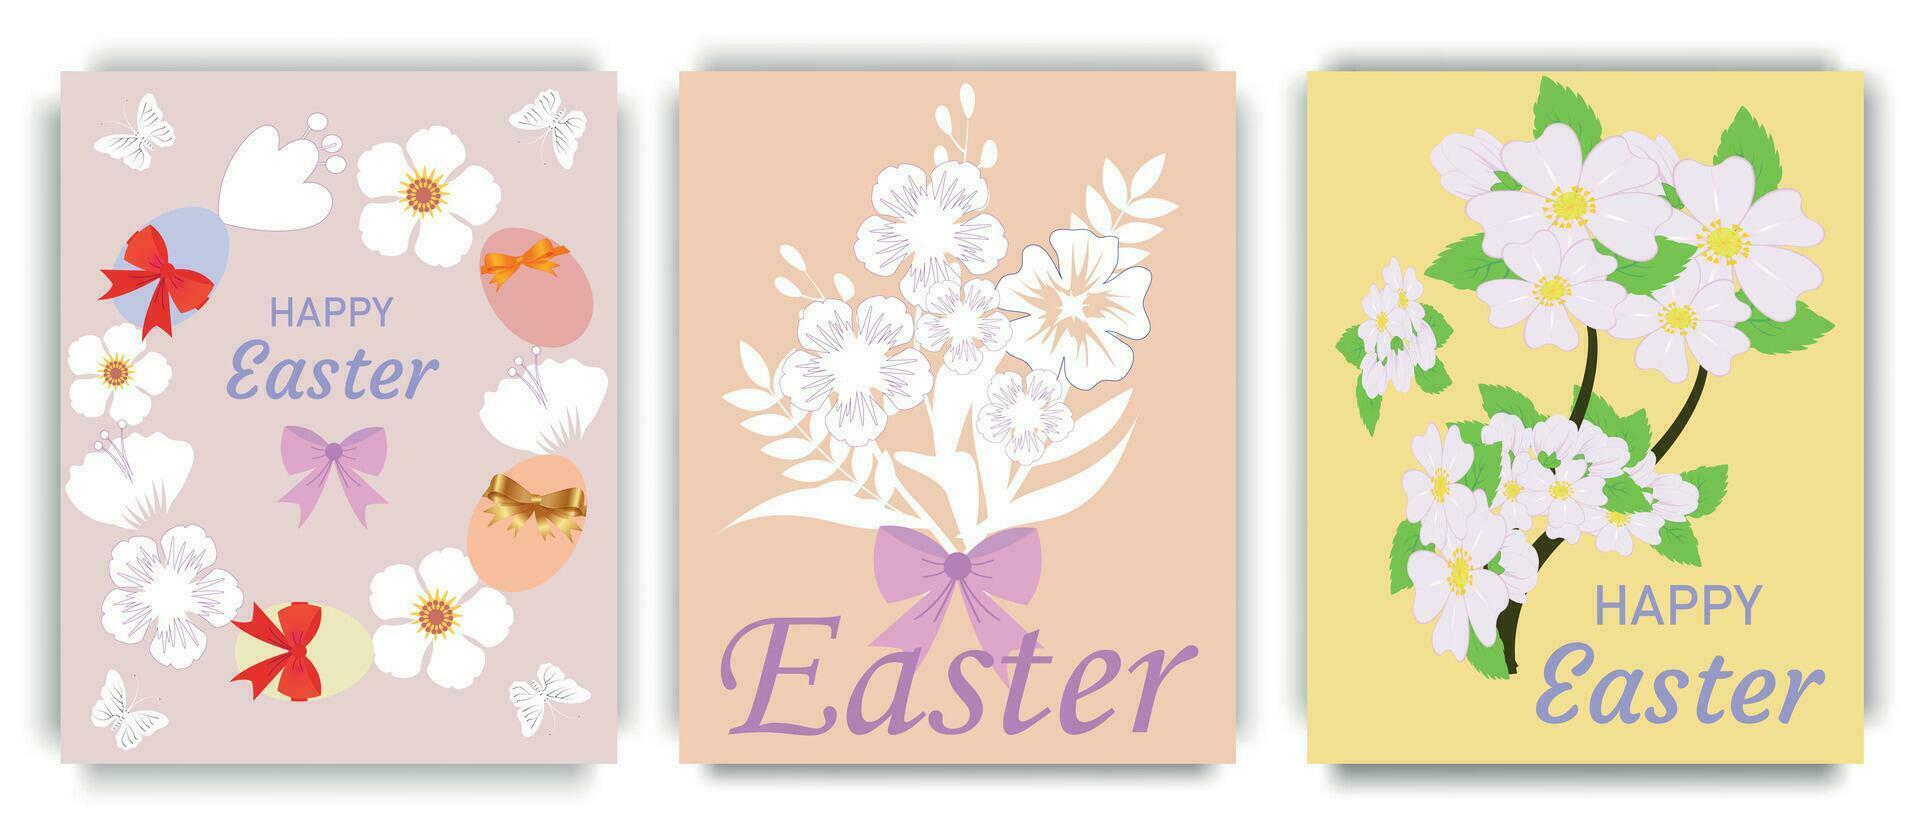 Set of Easter greeting posters. Vector illustration presented in trendy peach colors with bouquets of flowers, bows.